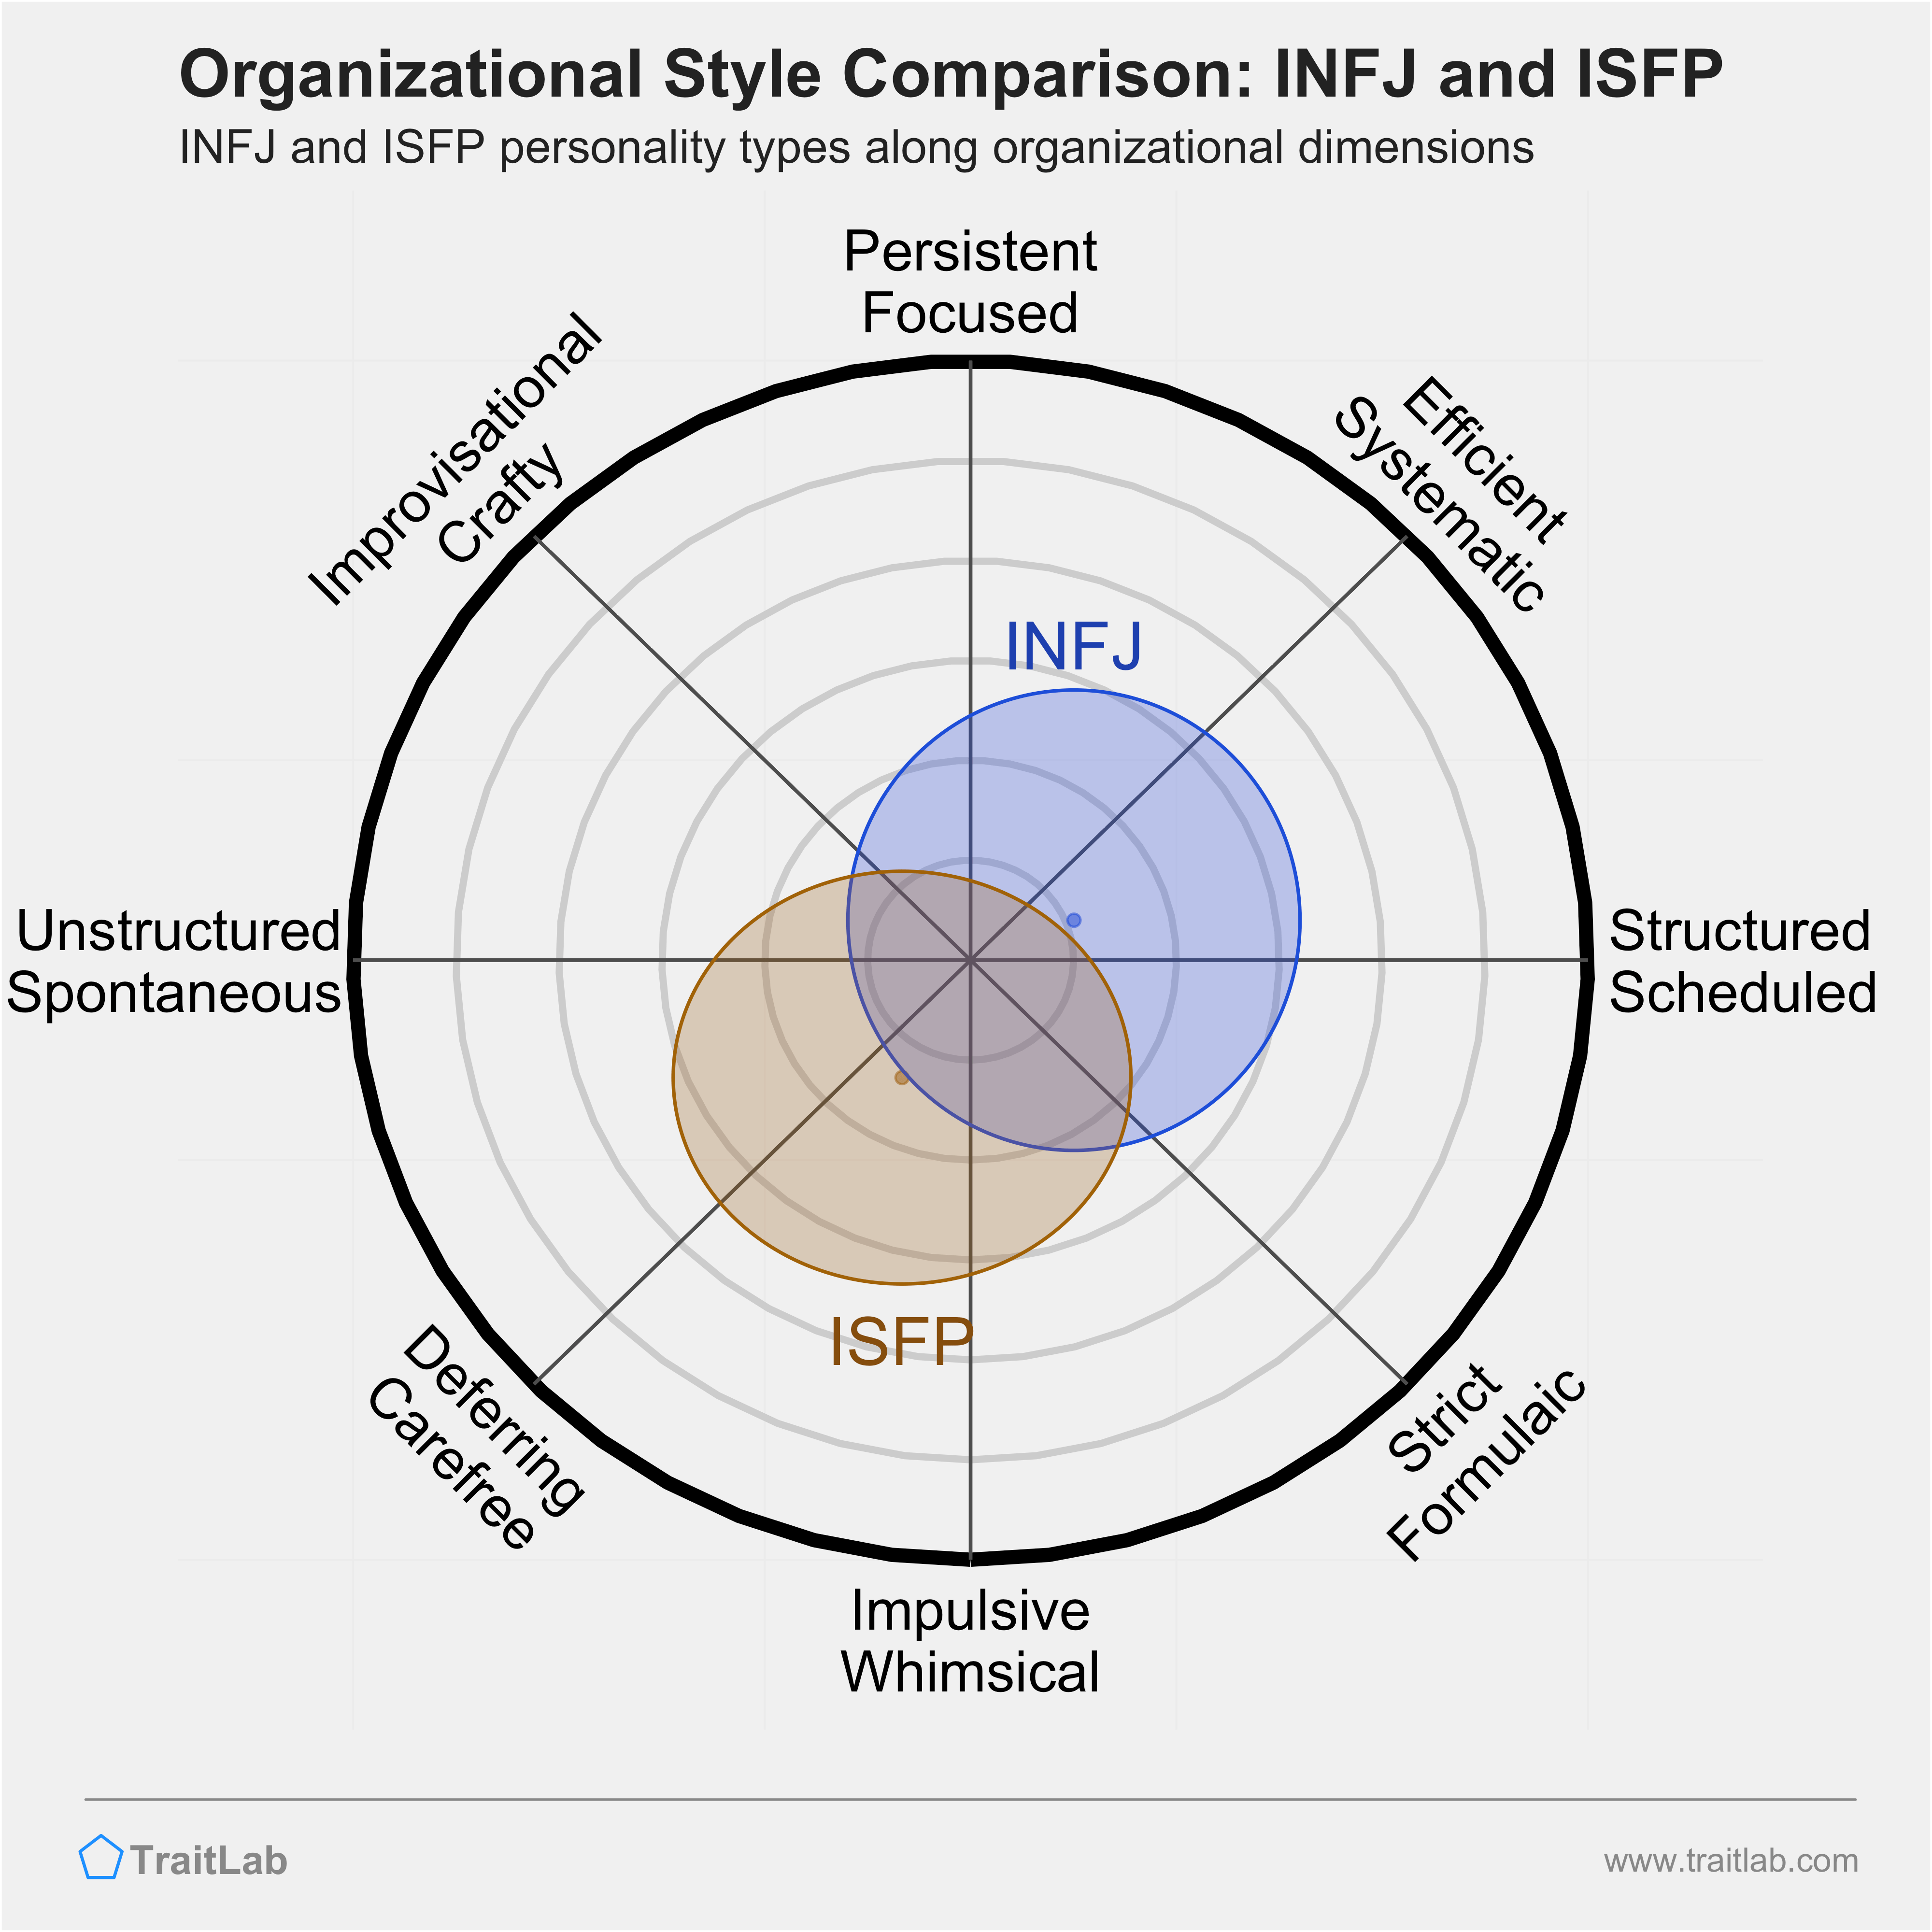 INFJ and ISFP comparison across organizational dimensions